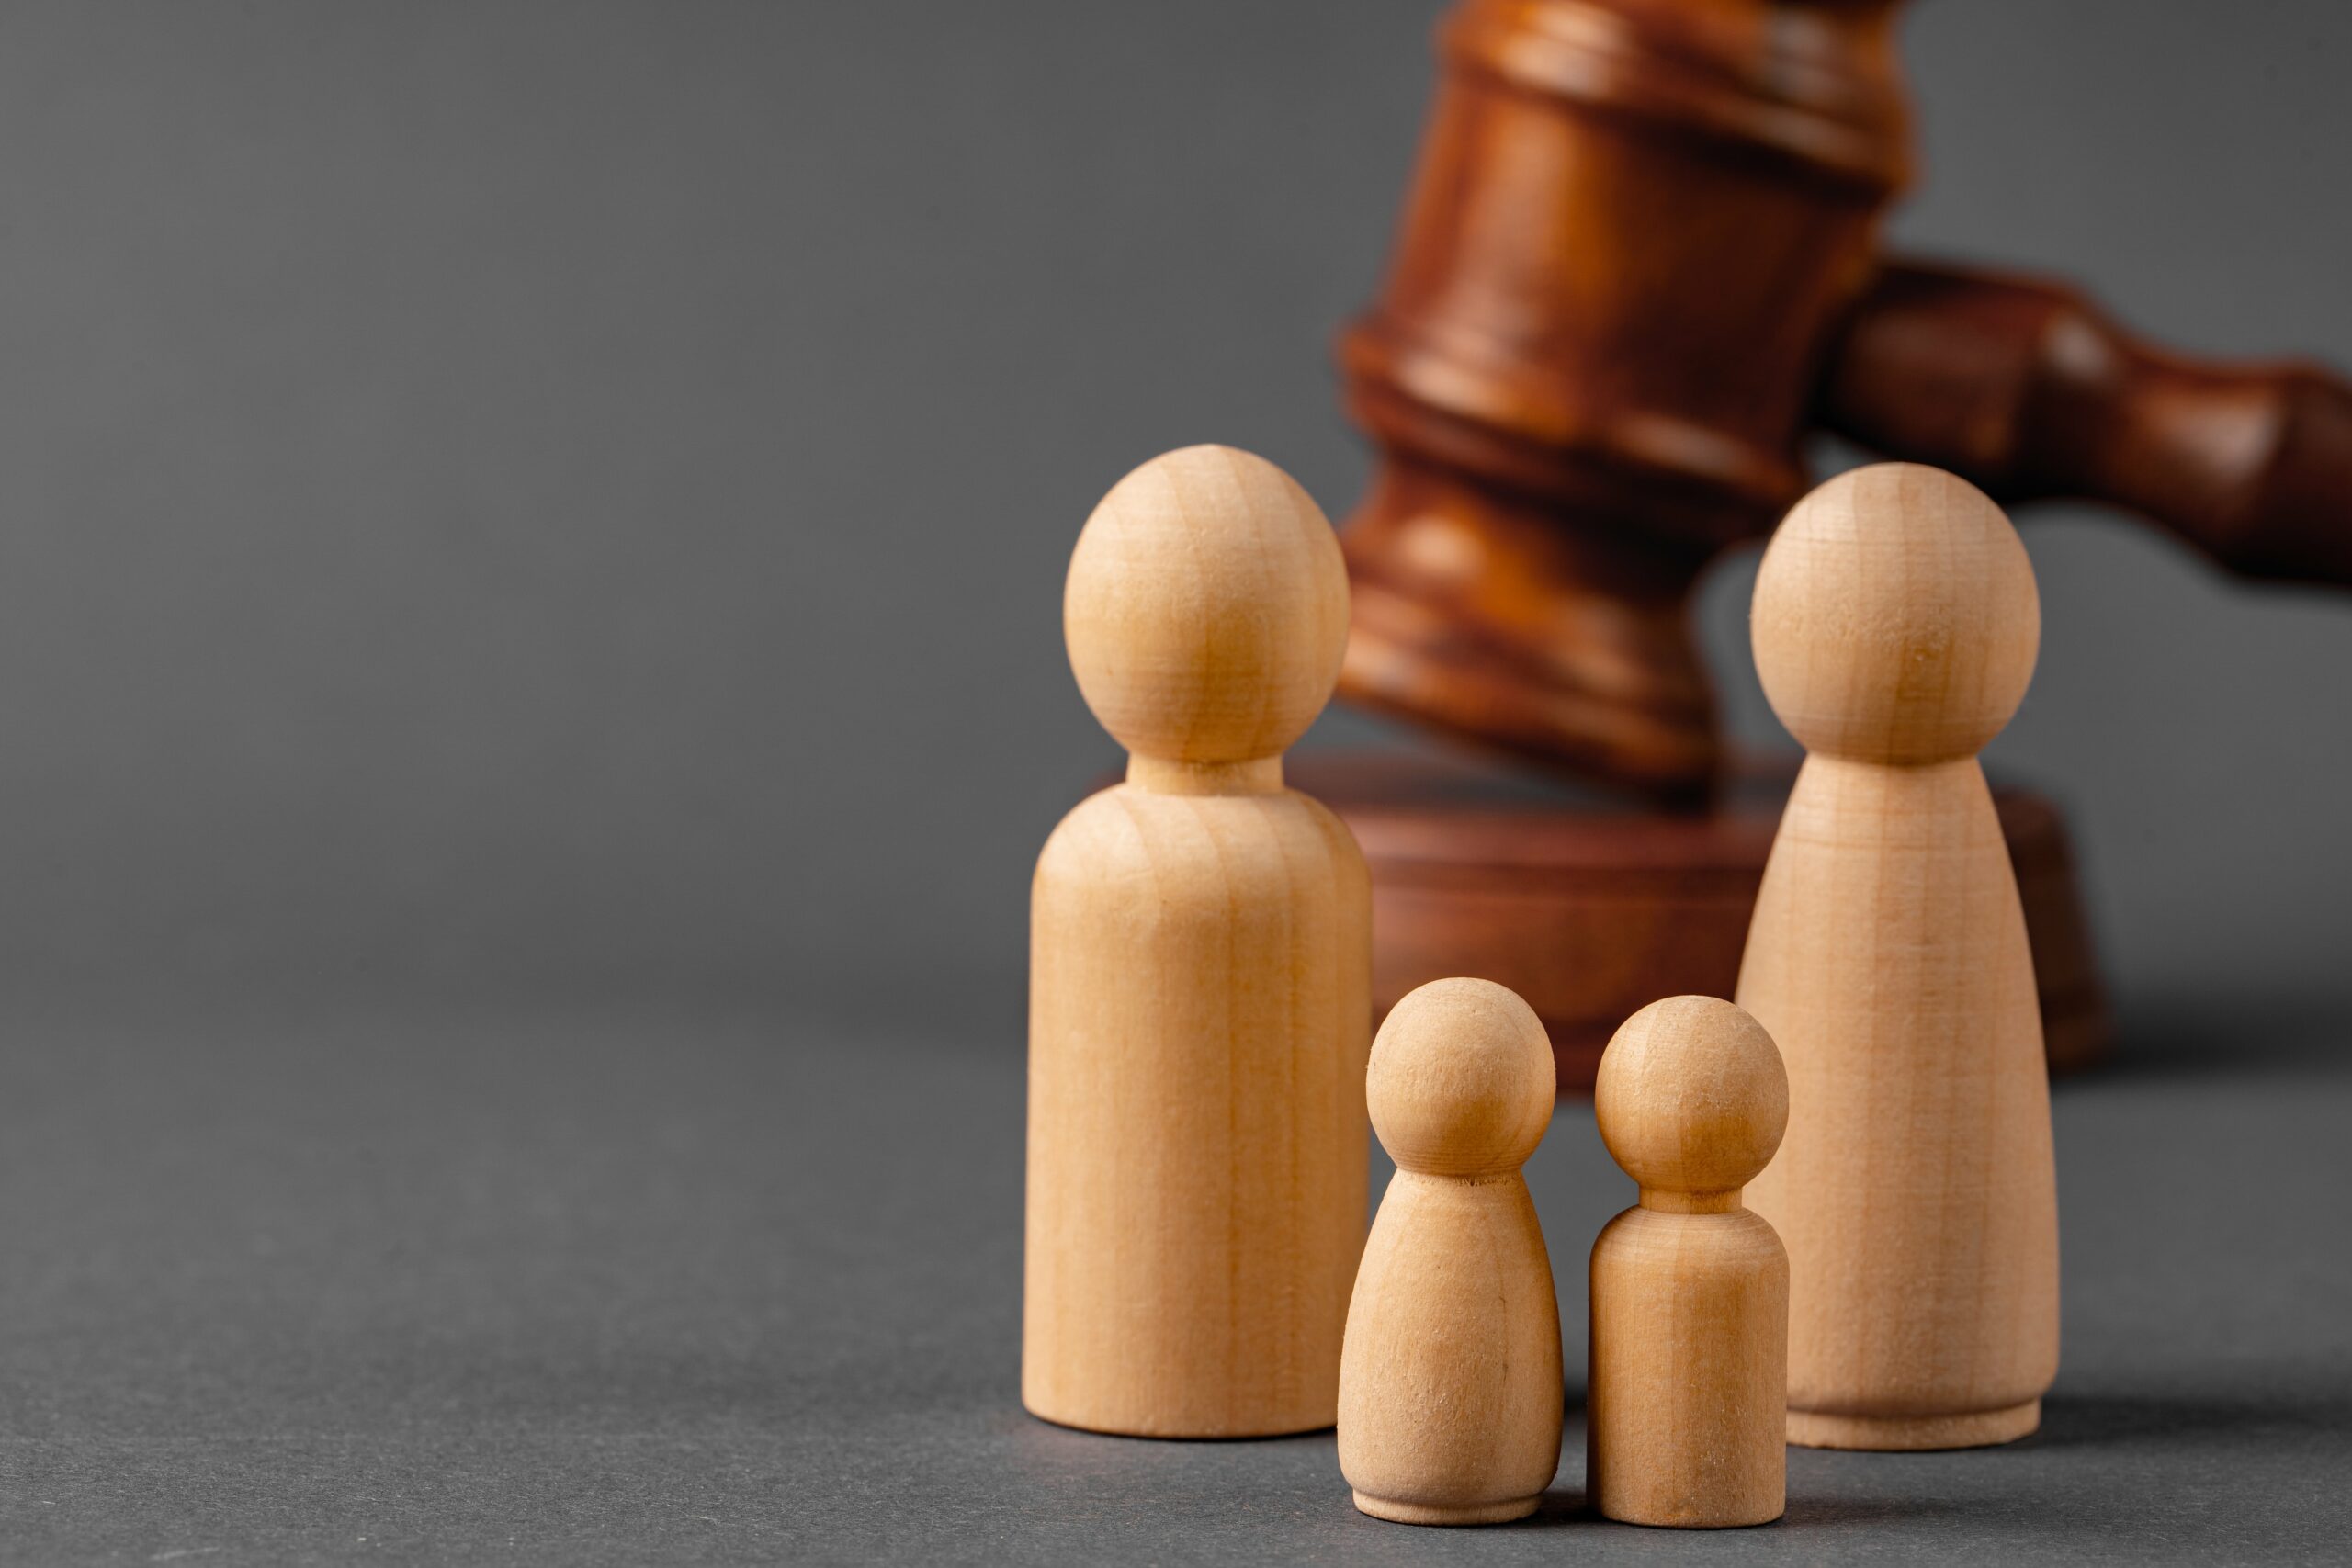 wooden-toy-family-and-judge-mallet-family-divorce